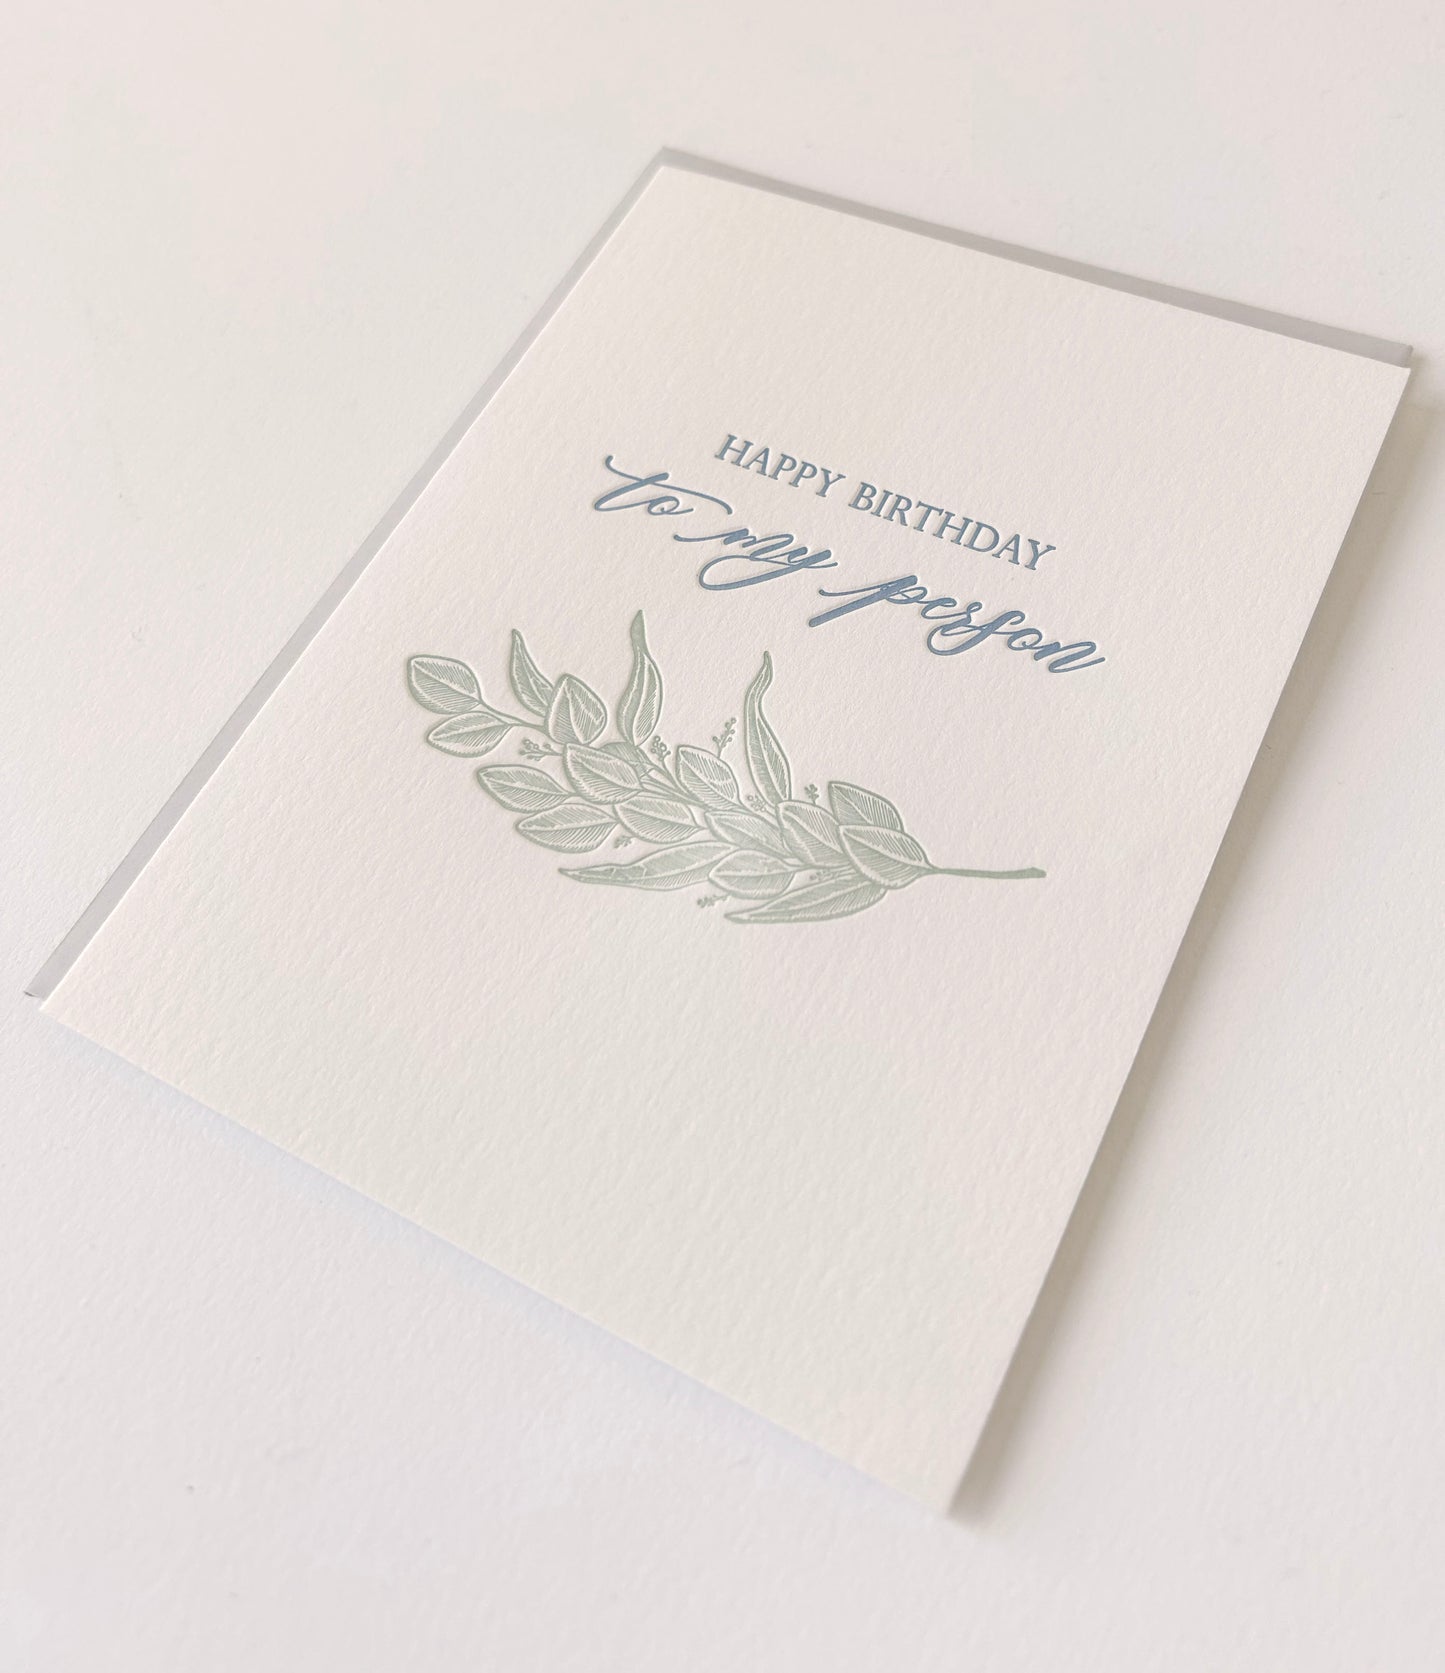 Letterpress birthday card with greenery that says "Happy Birthday To My Person" by Rust Belt Love